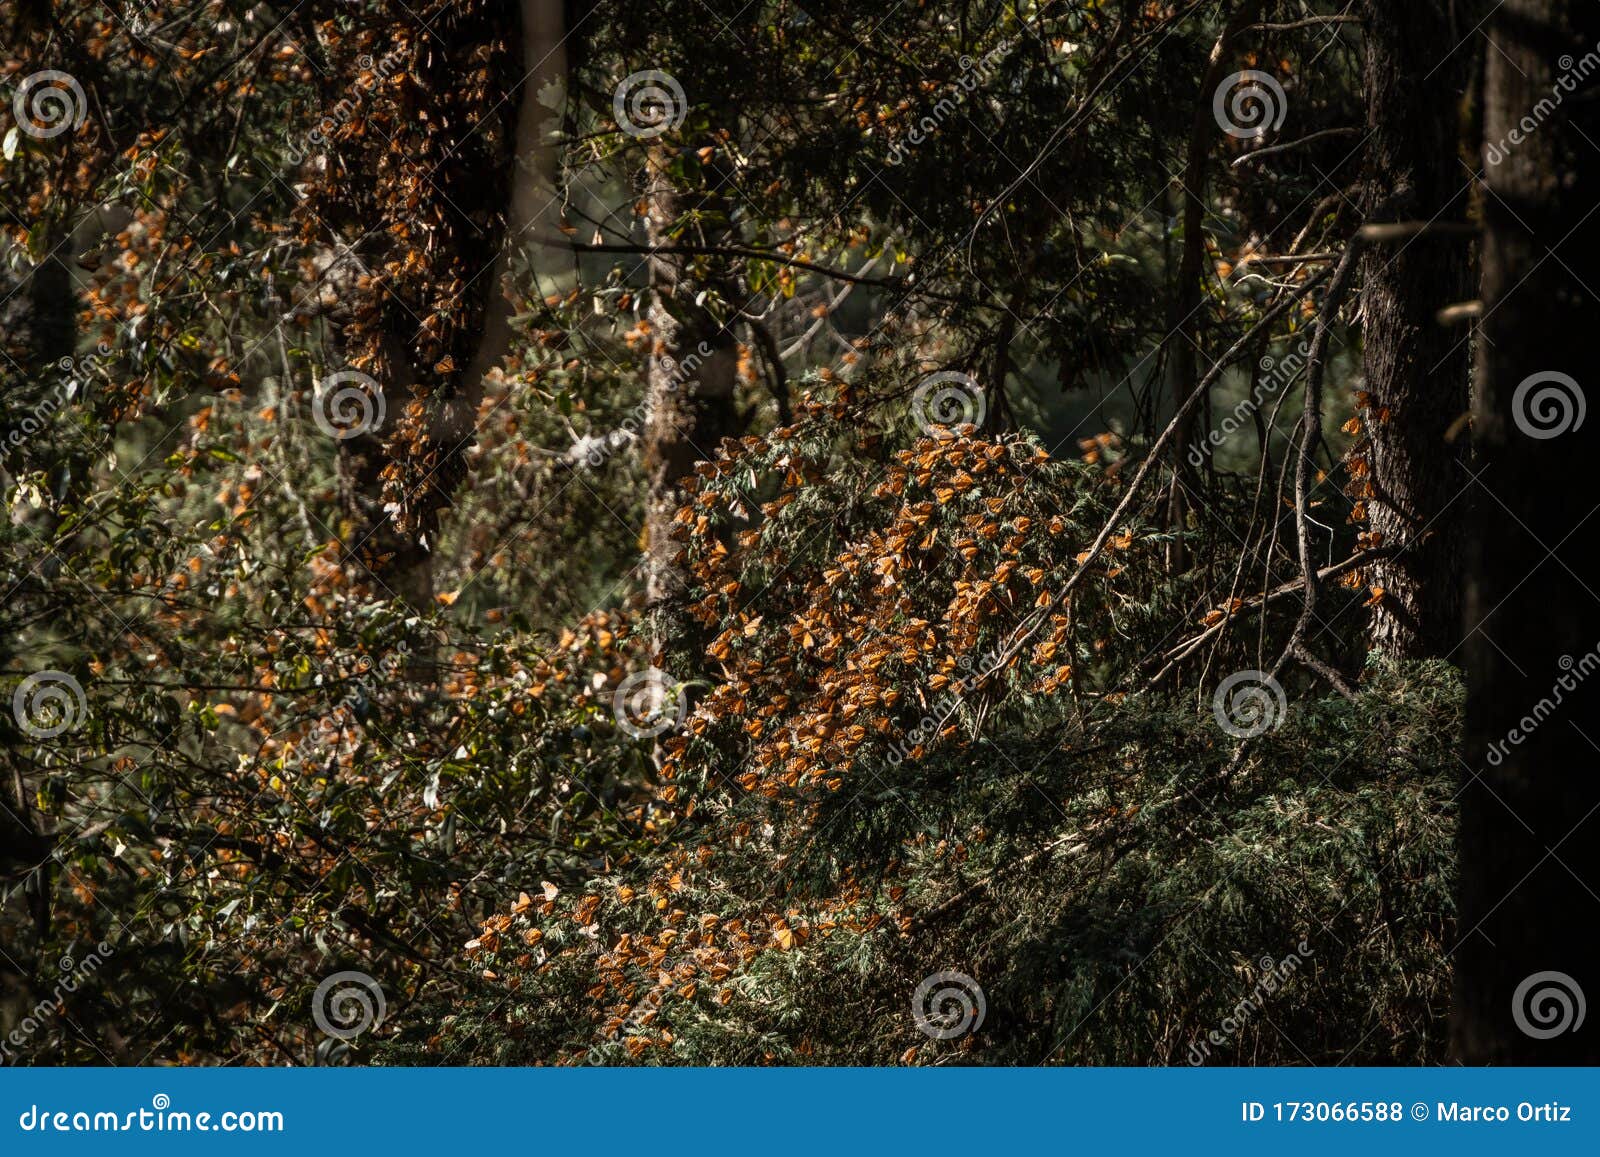 group of monarch butterflies danaus plexippus resting and perching on a tree branch